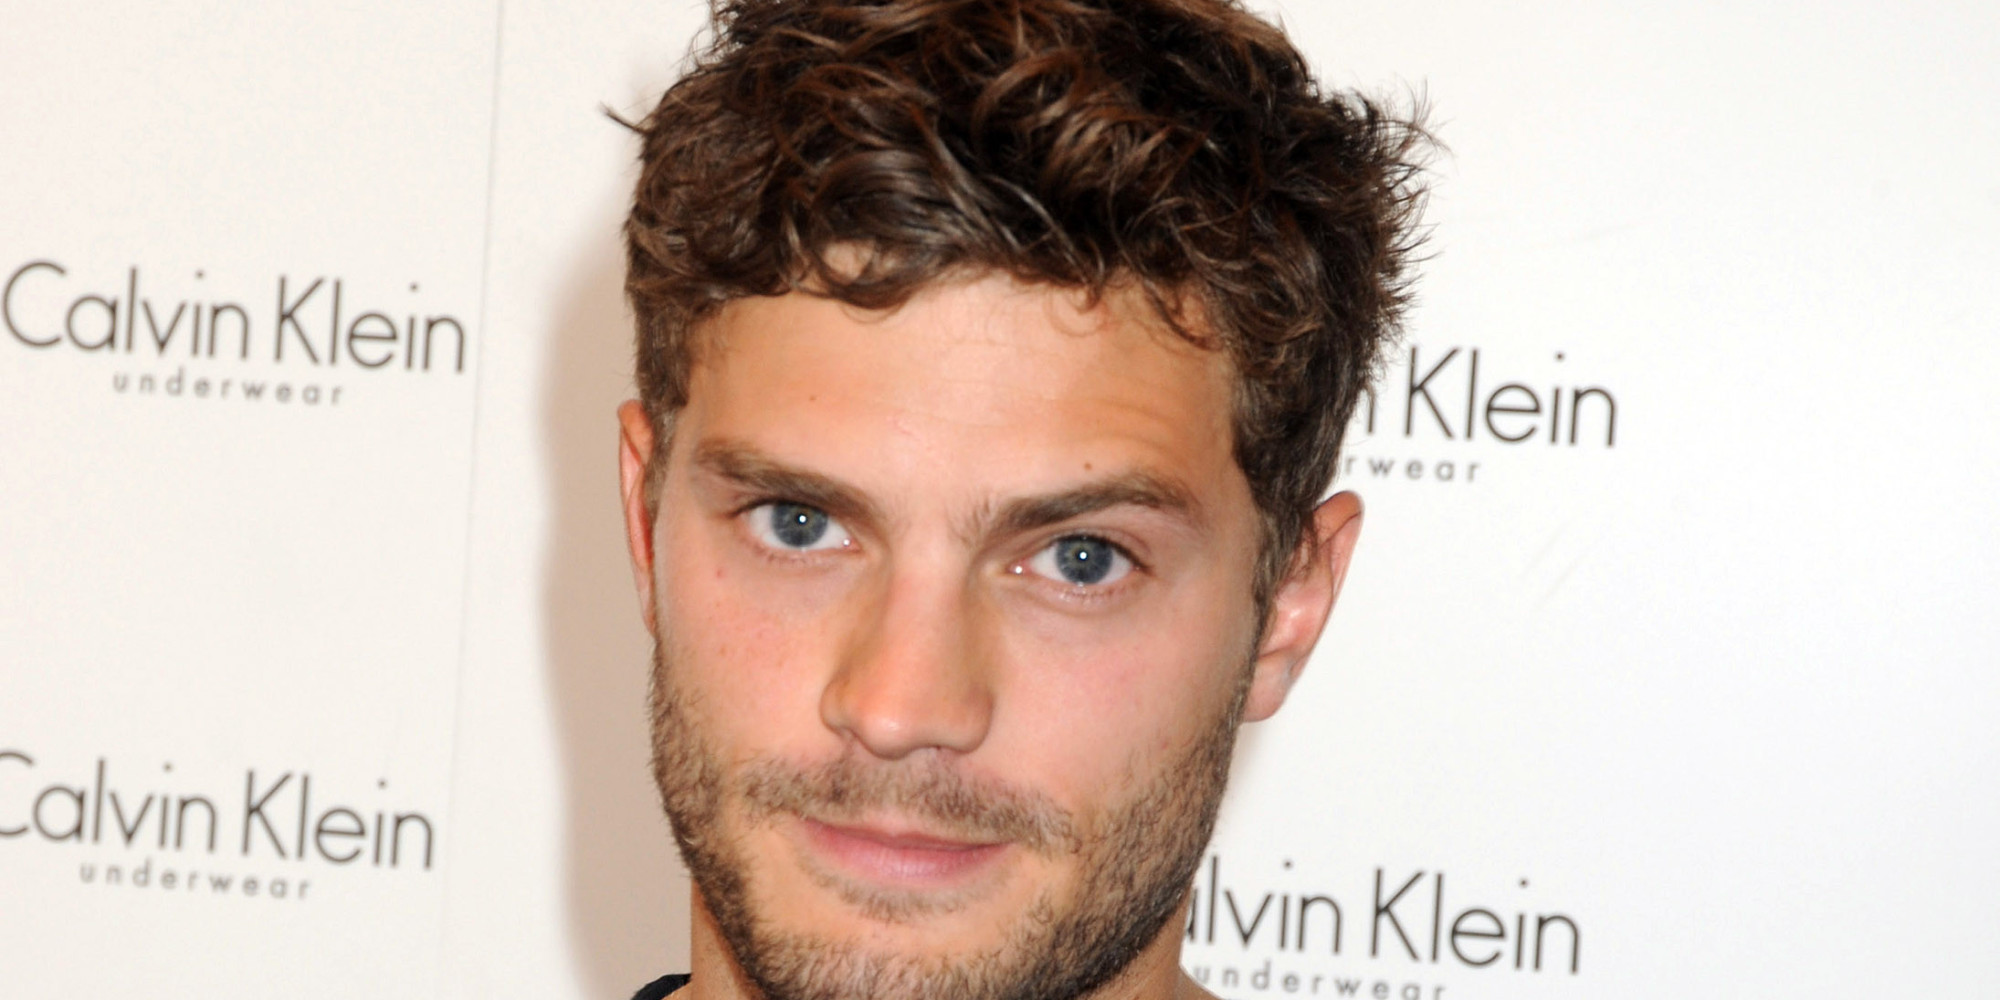 Fifty Shades Of Grey Star Jamie Dornan Says He Prepares For Sex 